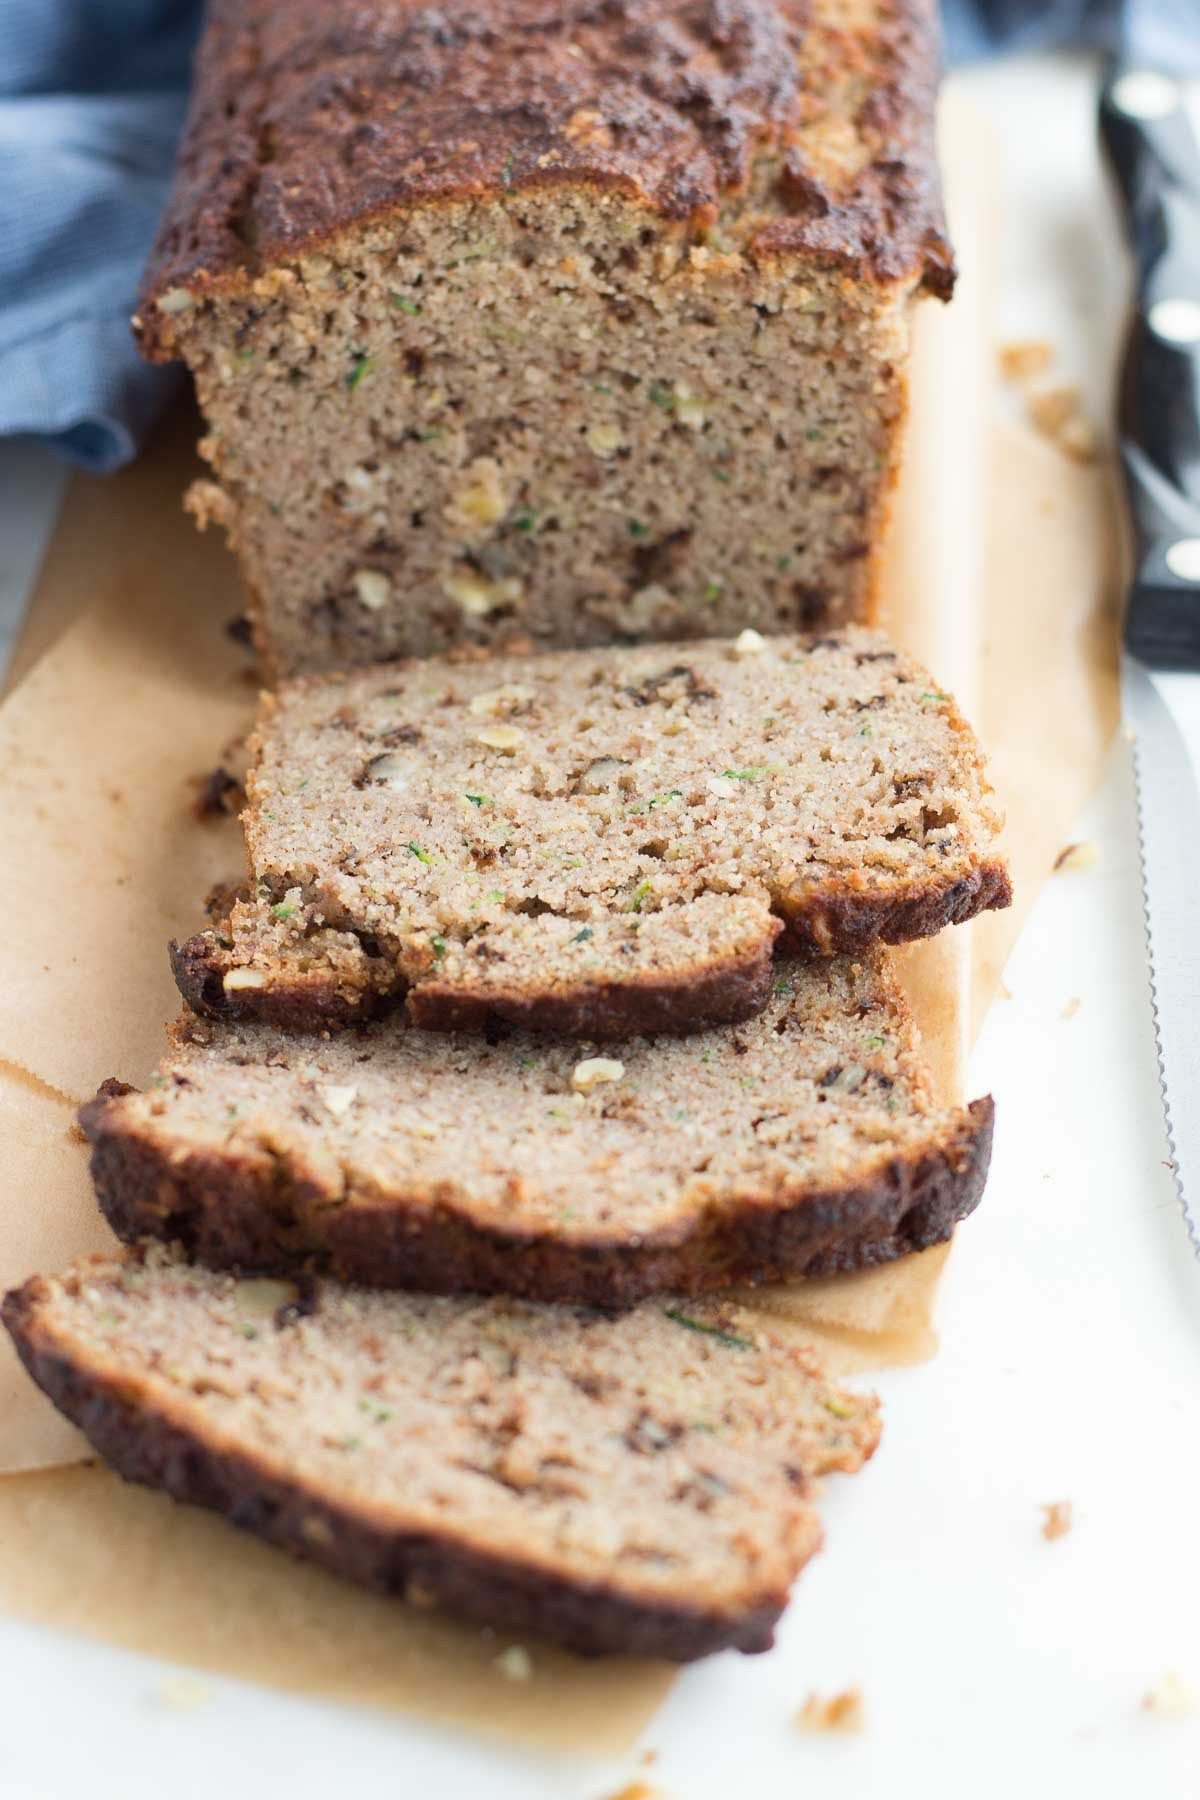 Atkins Zucchini Bread
 This Low Carb Zucchini Bread is made from coconut flour so